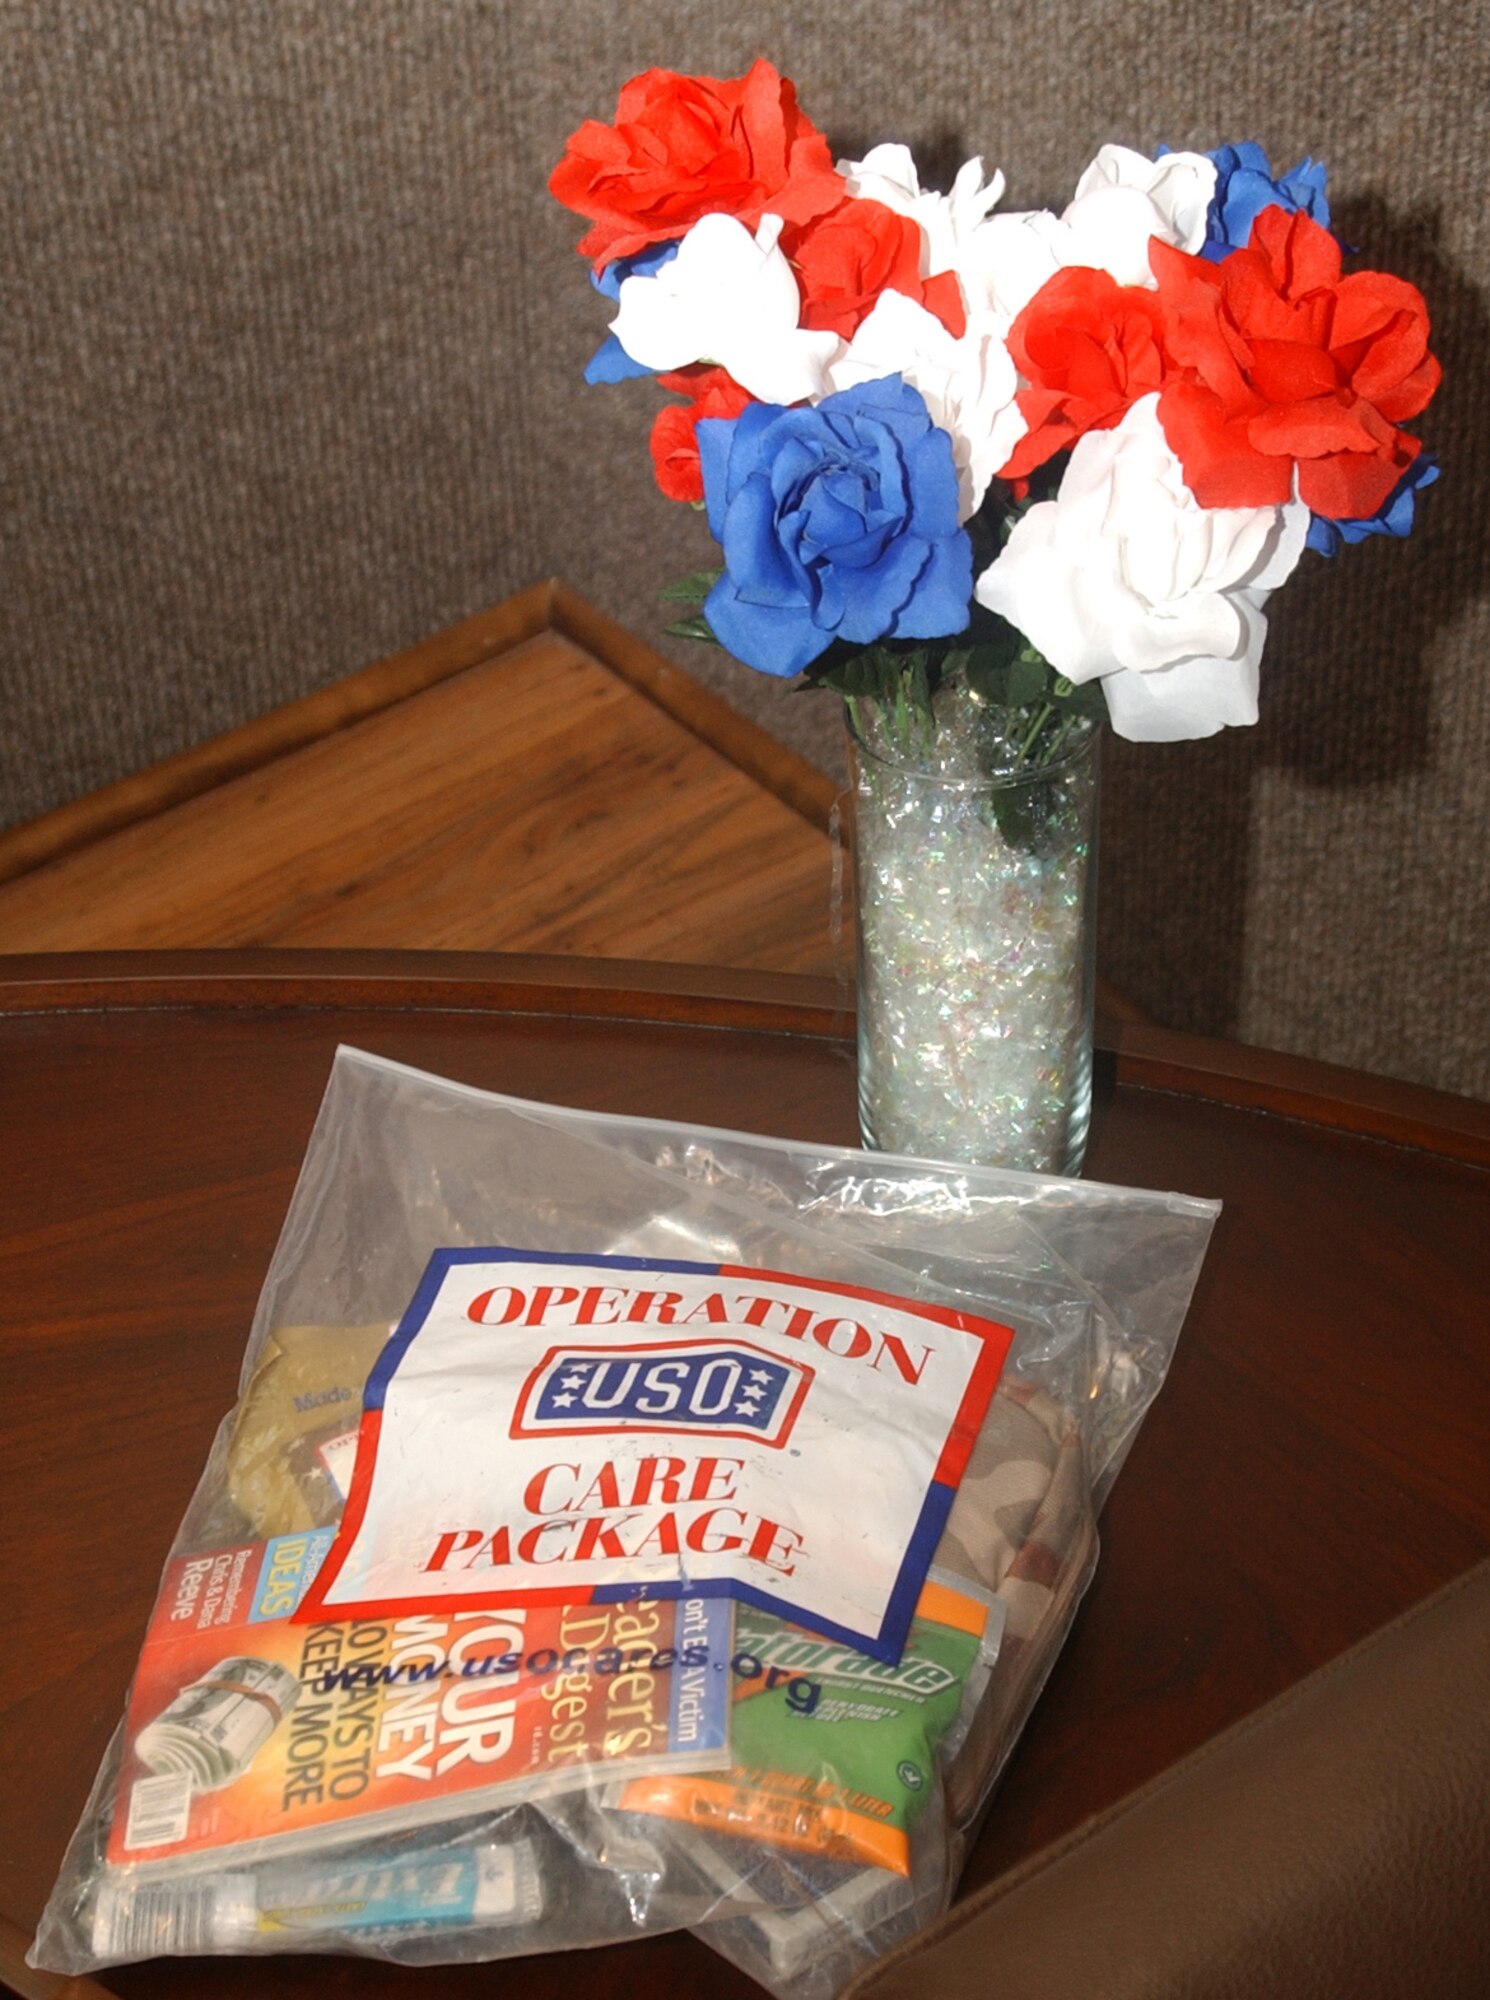 "Operation Care Package" provides deployed servicemembers with pre-paid international calling cards, playing cards, disposable cameras, a copy of "Reader's Digest" and snacks, as shown here. The United Services Organization in conjunction with a nationwide financial company made a stop in Great Falls at the Montana Veterans Memorial Aug. 27during its 70-city tour to collect donations to help raise funds for the care packages . (U.S. Air Force photo/Airman 1st Class Dillon White)